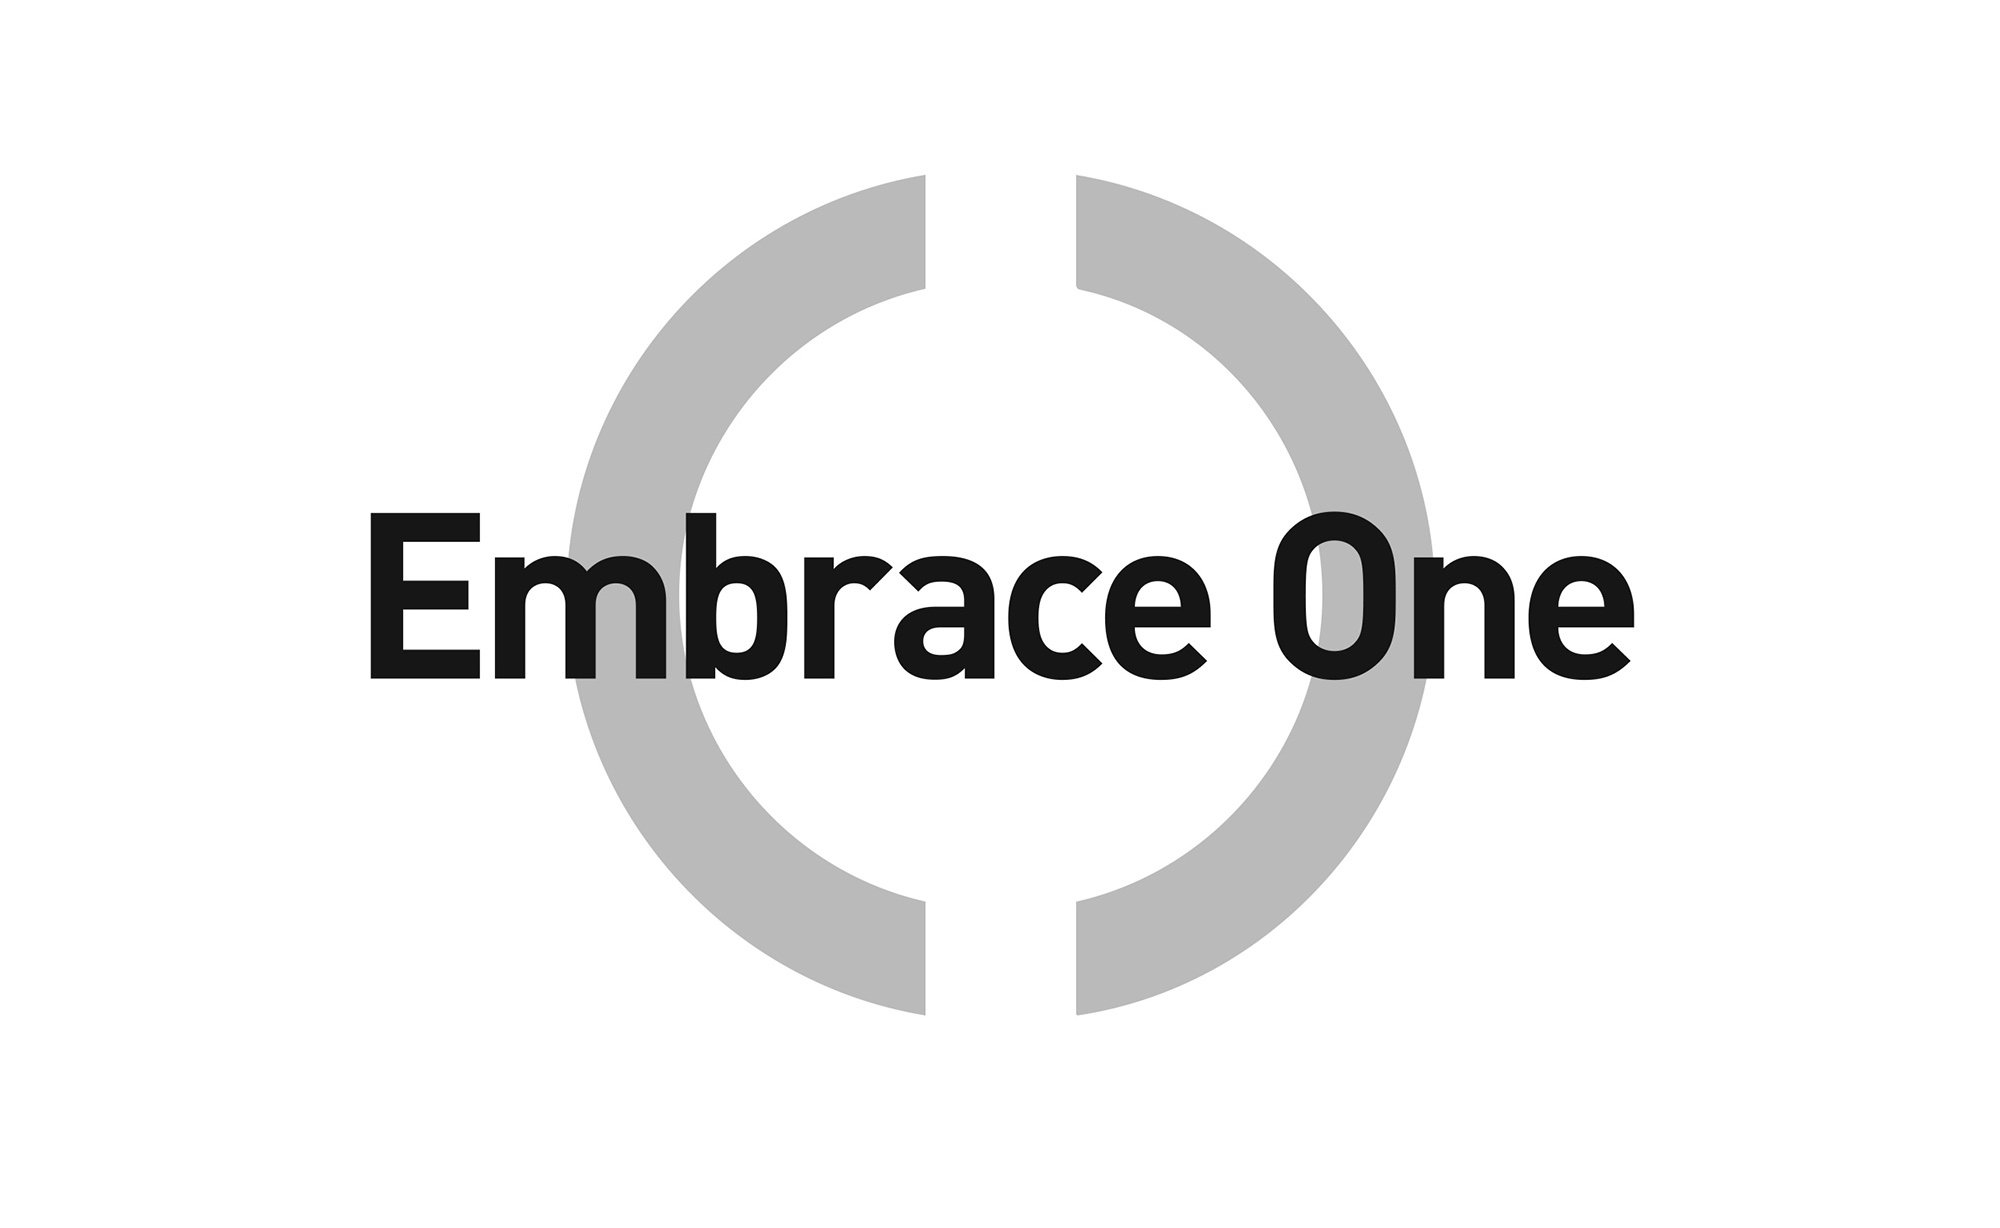  EMBRACE ONE